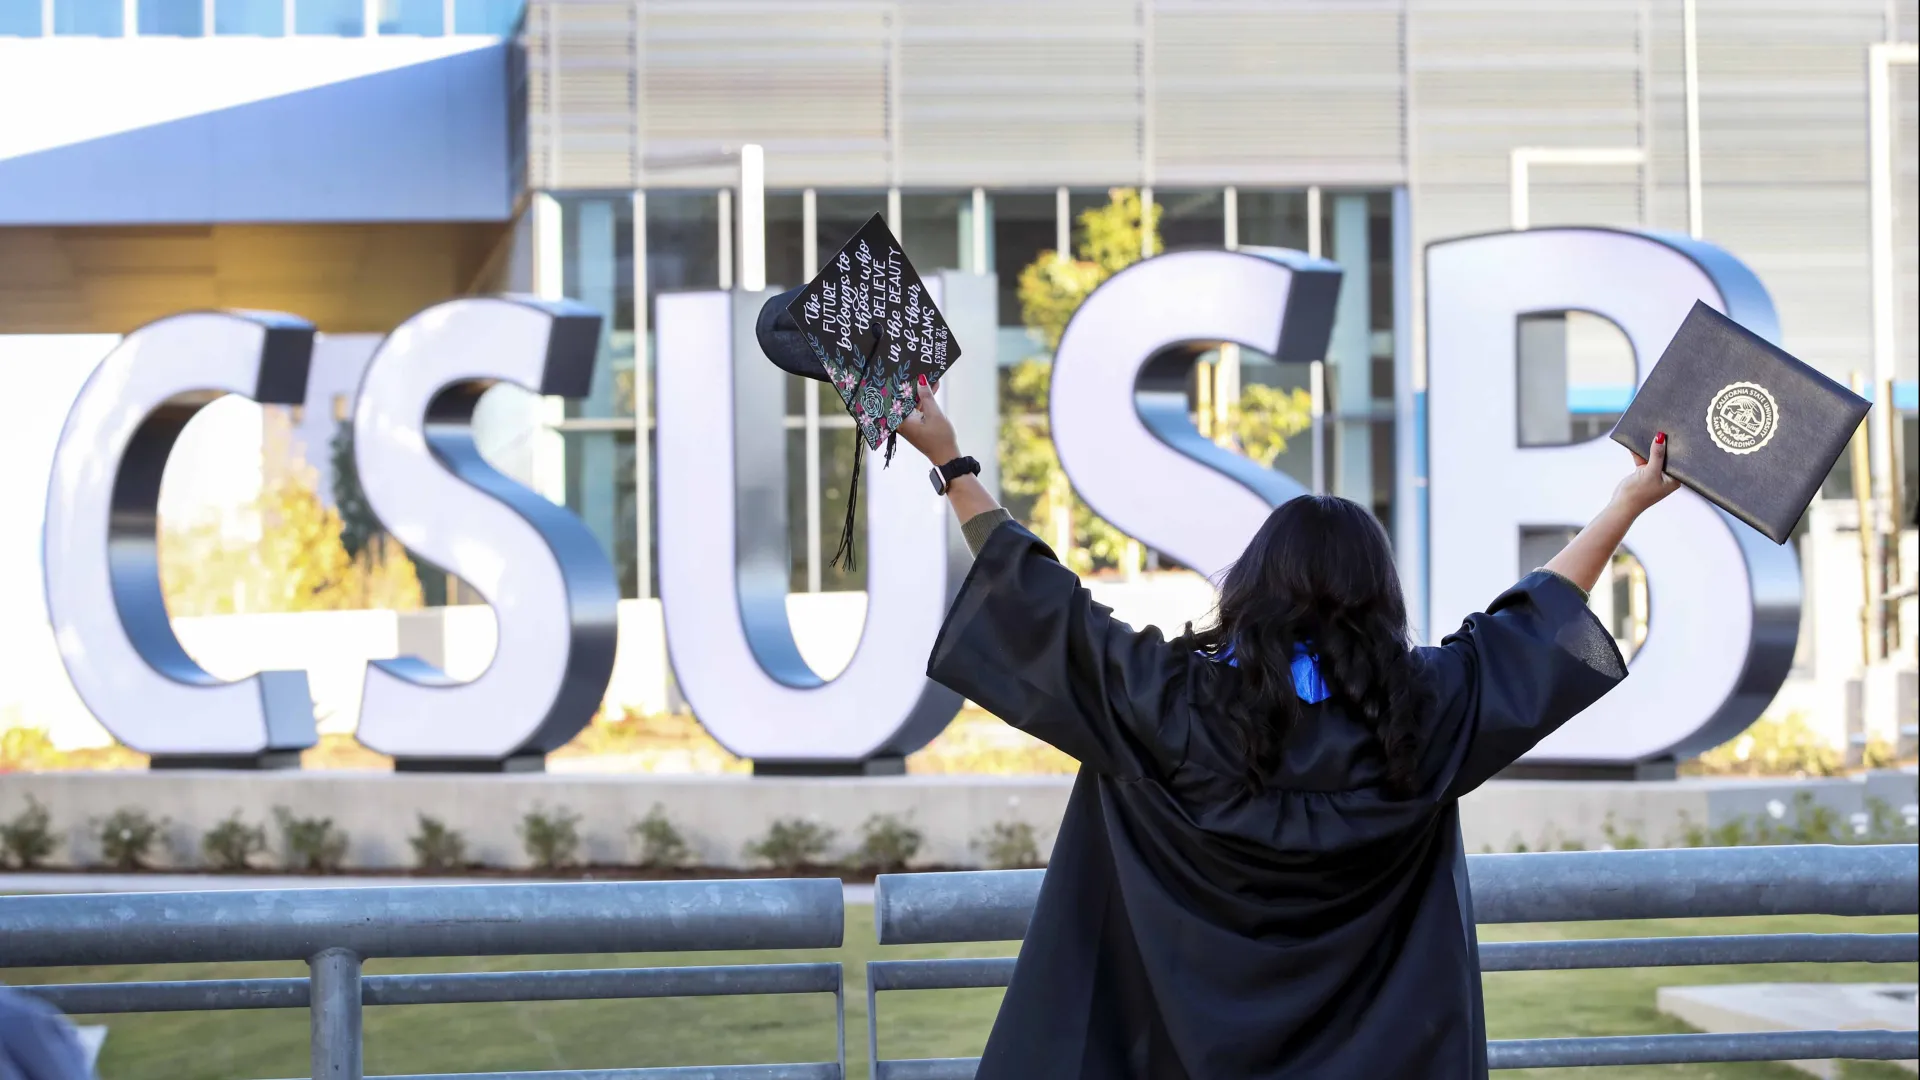 Student at the CSUSB sign by SMSU North